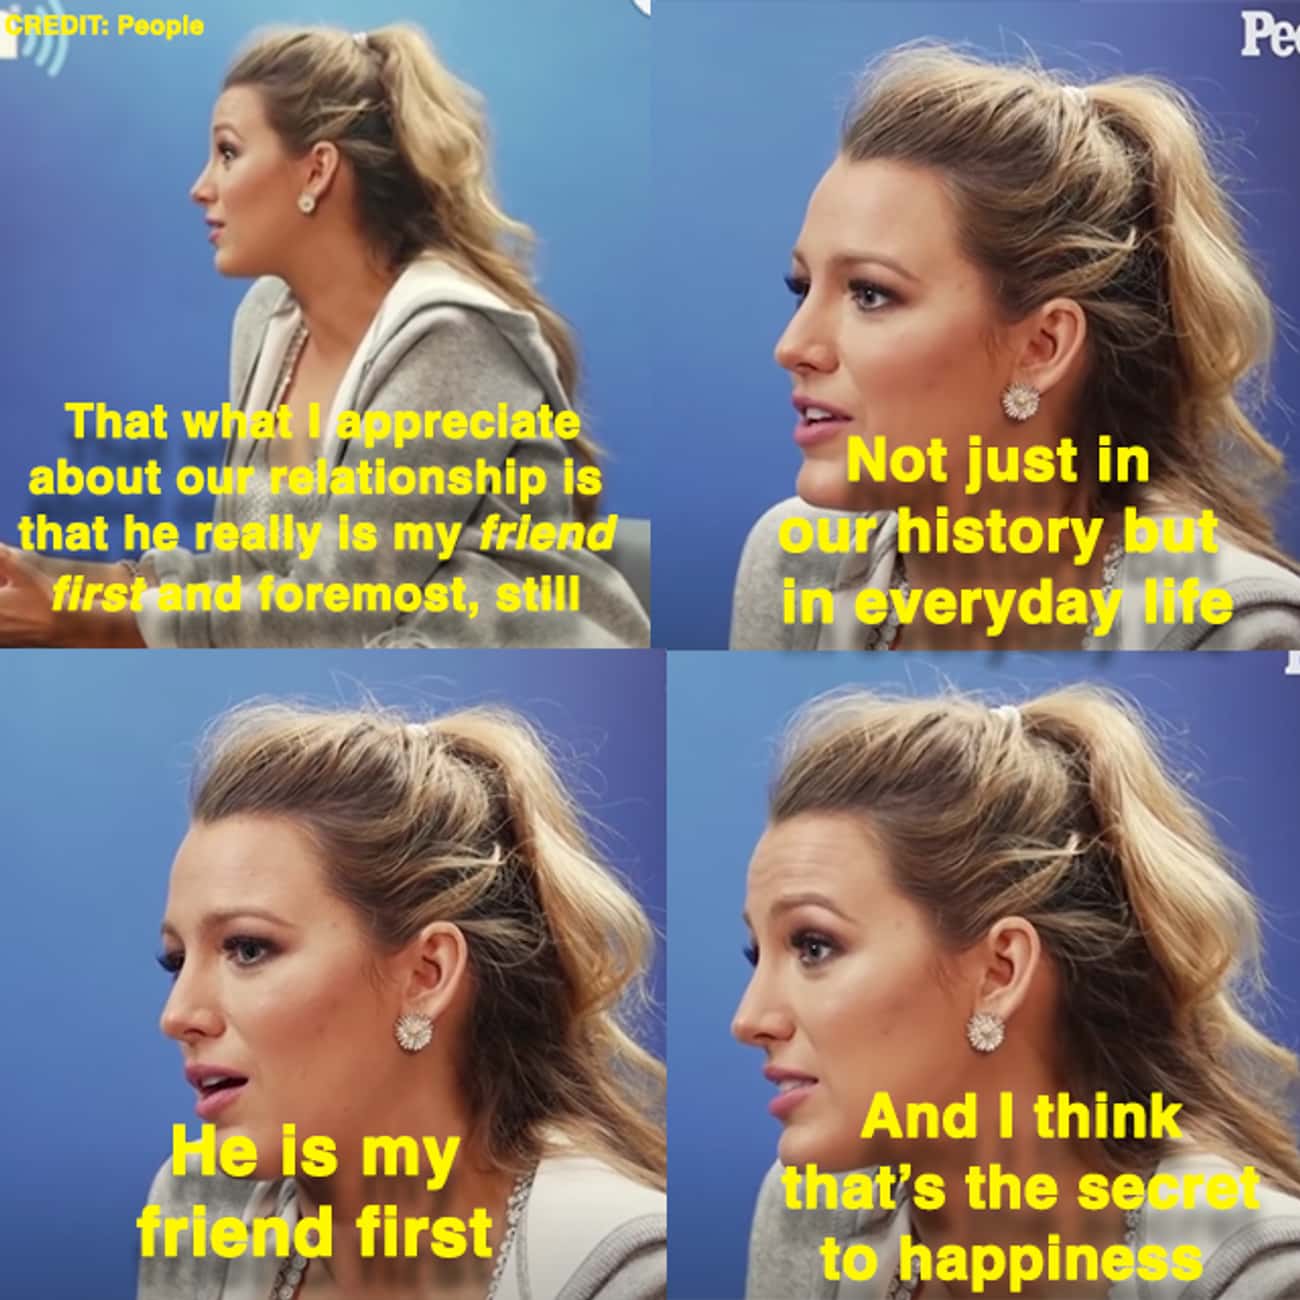 Ryan Reynolds Is Blake Lively's Friend First